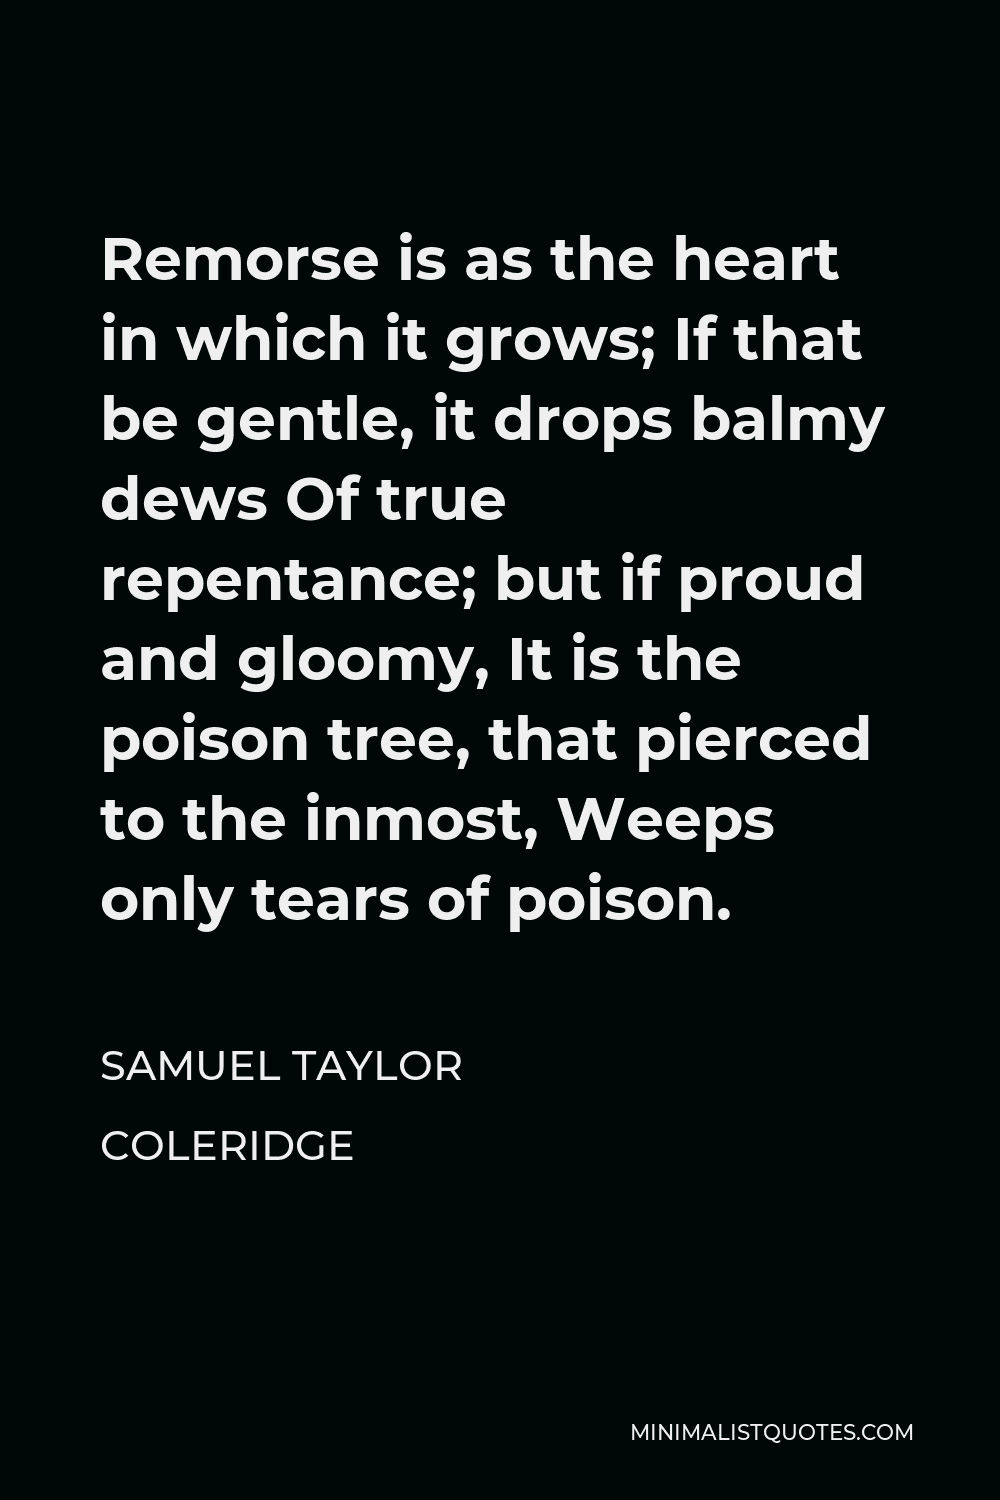 Samuel Taylor Coleridge Quote - Remorse is as the heart in which it grows; If that be gentle, it drops balmy dews Of true repentance; but if proud and gloomy, It is the poison tree, that pierced to the inmost, Weeps only tears of poison.